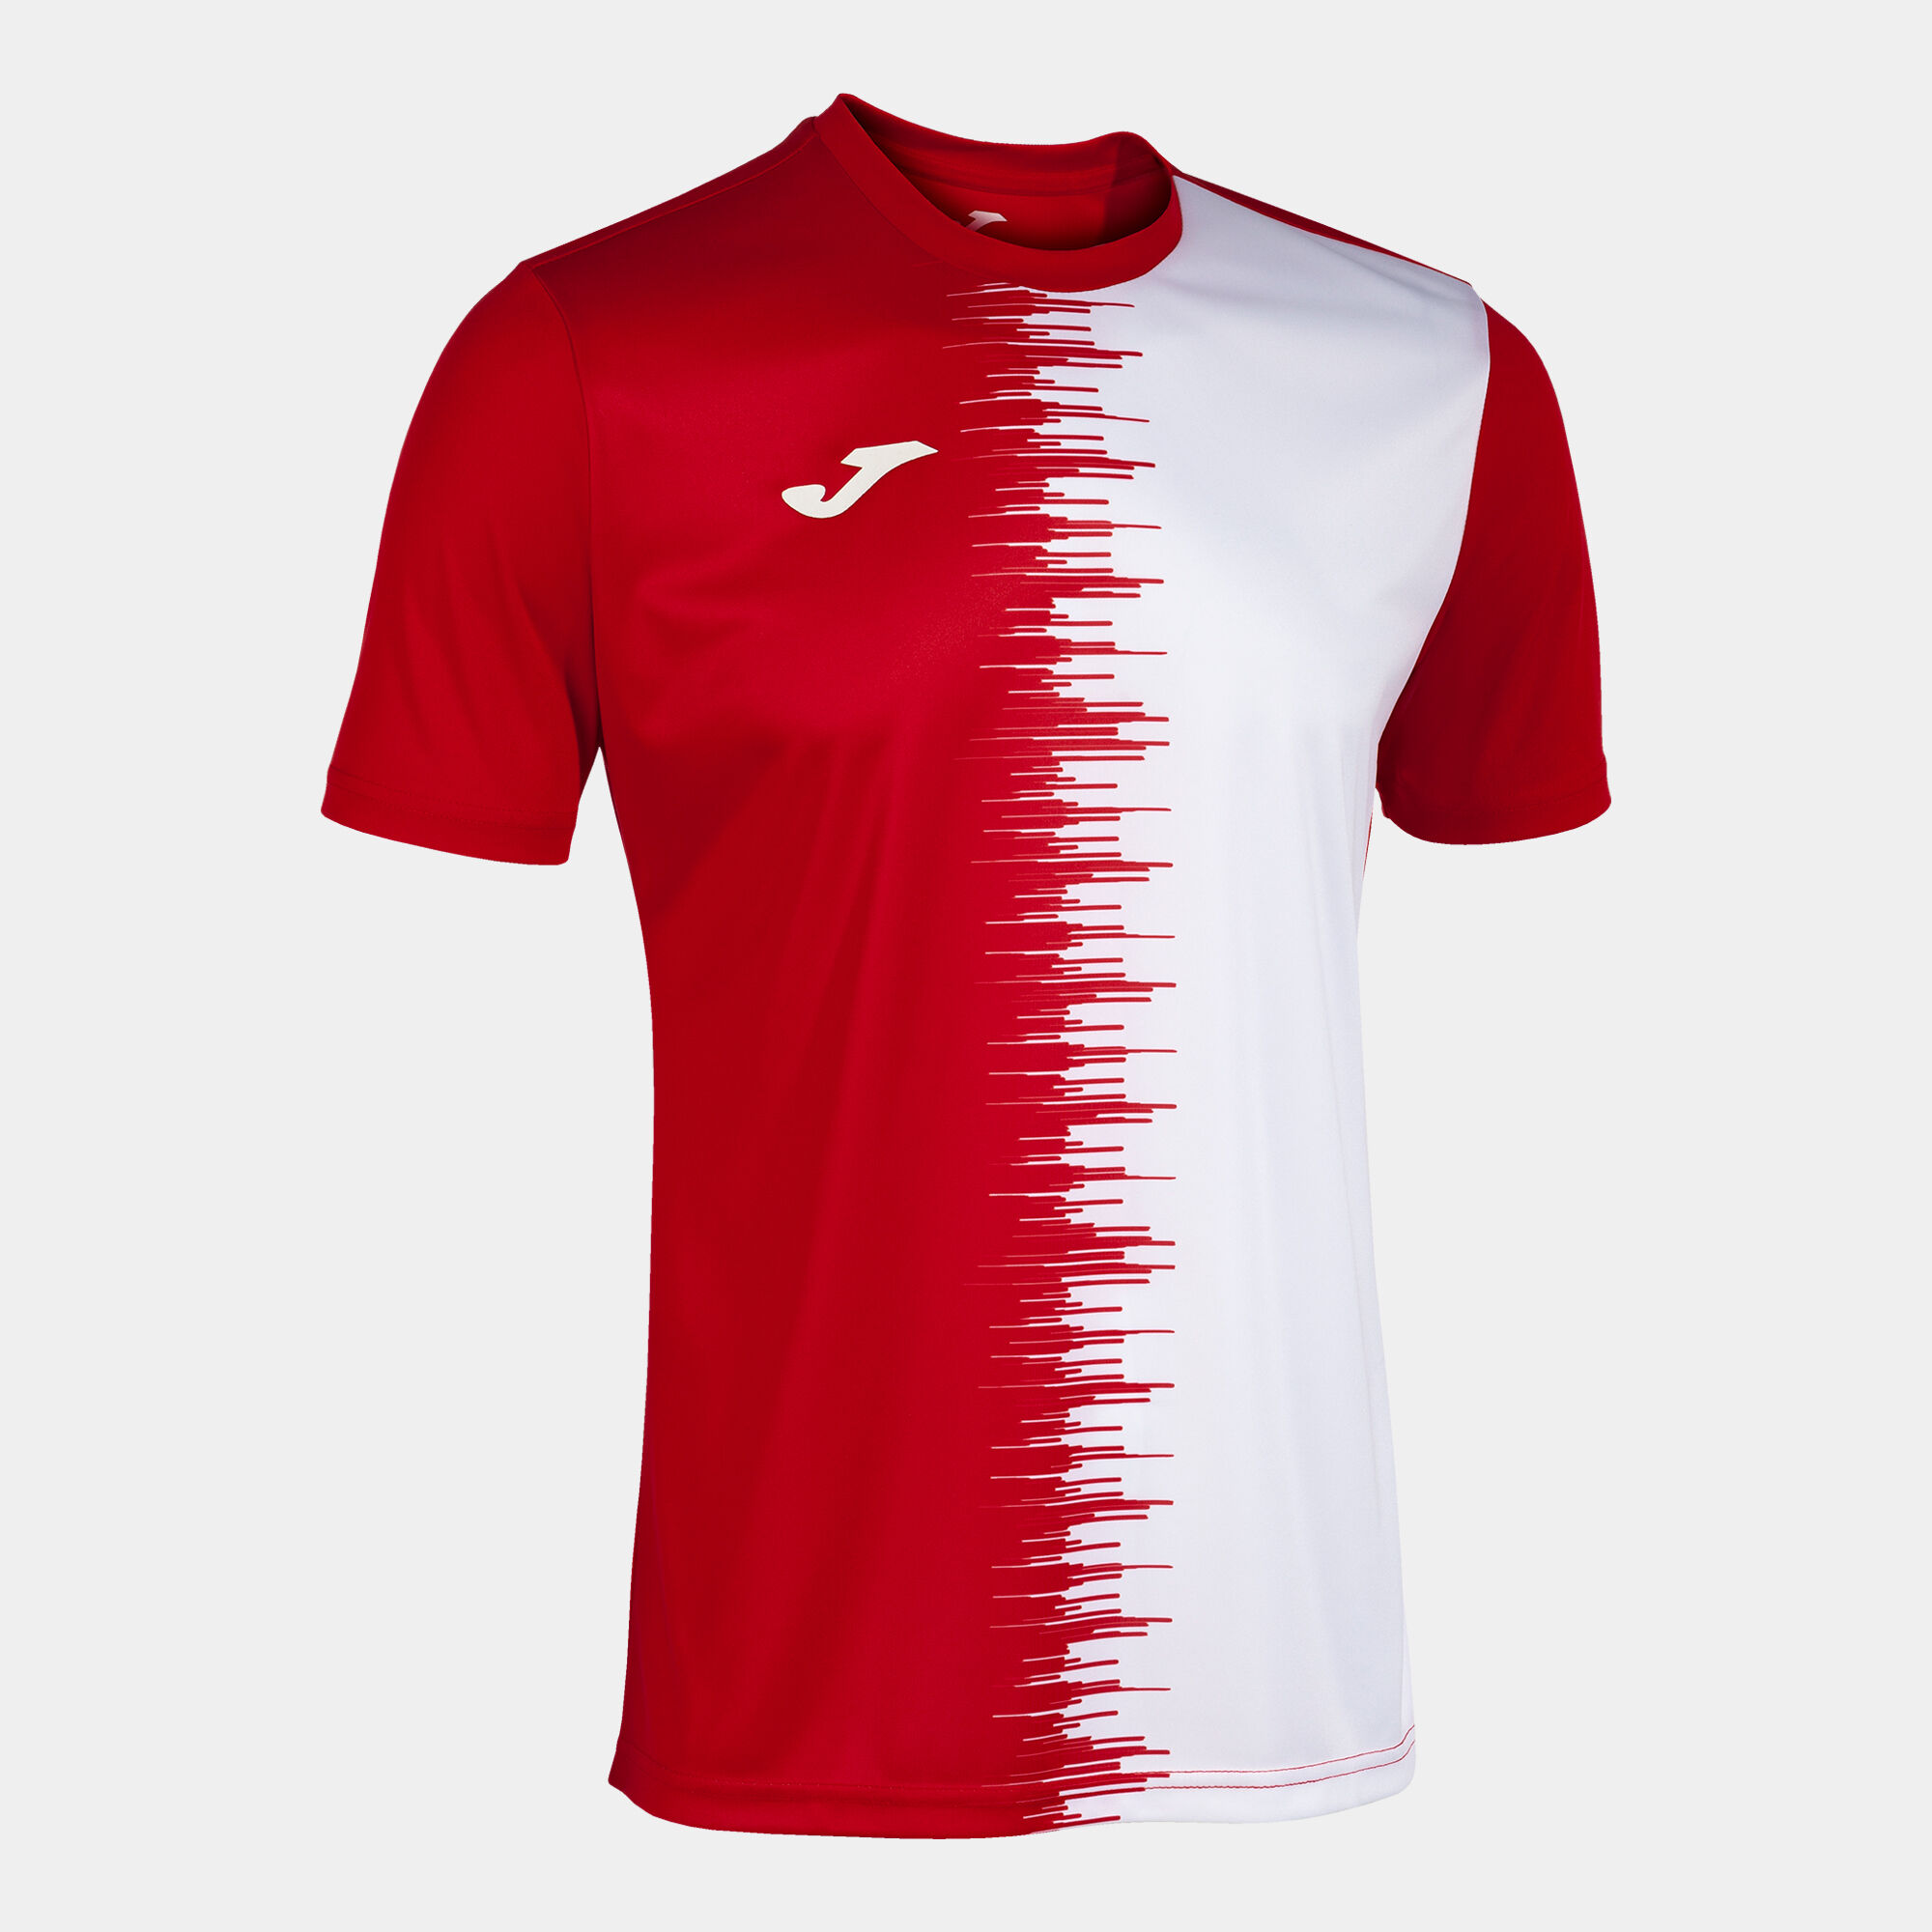 Maillot manches courtes homme City II rouge blanc